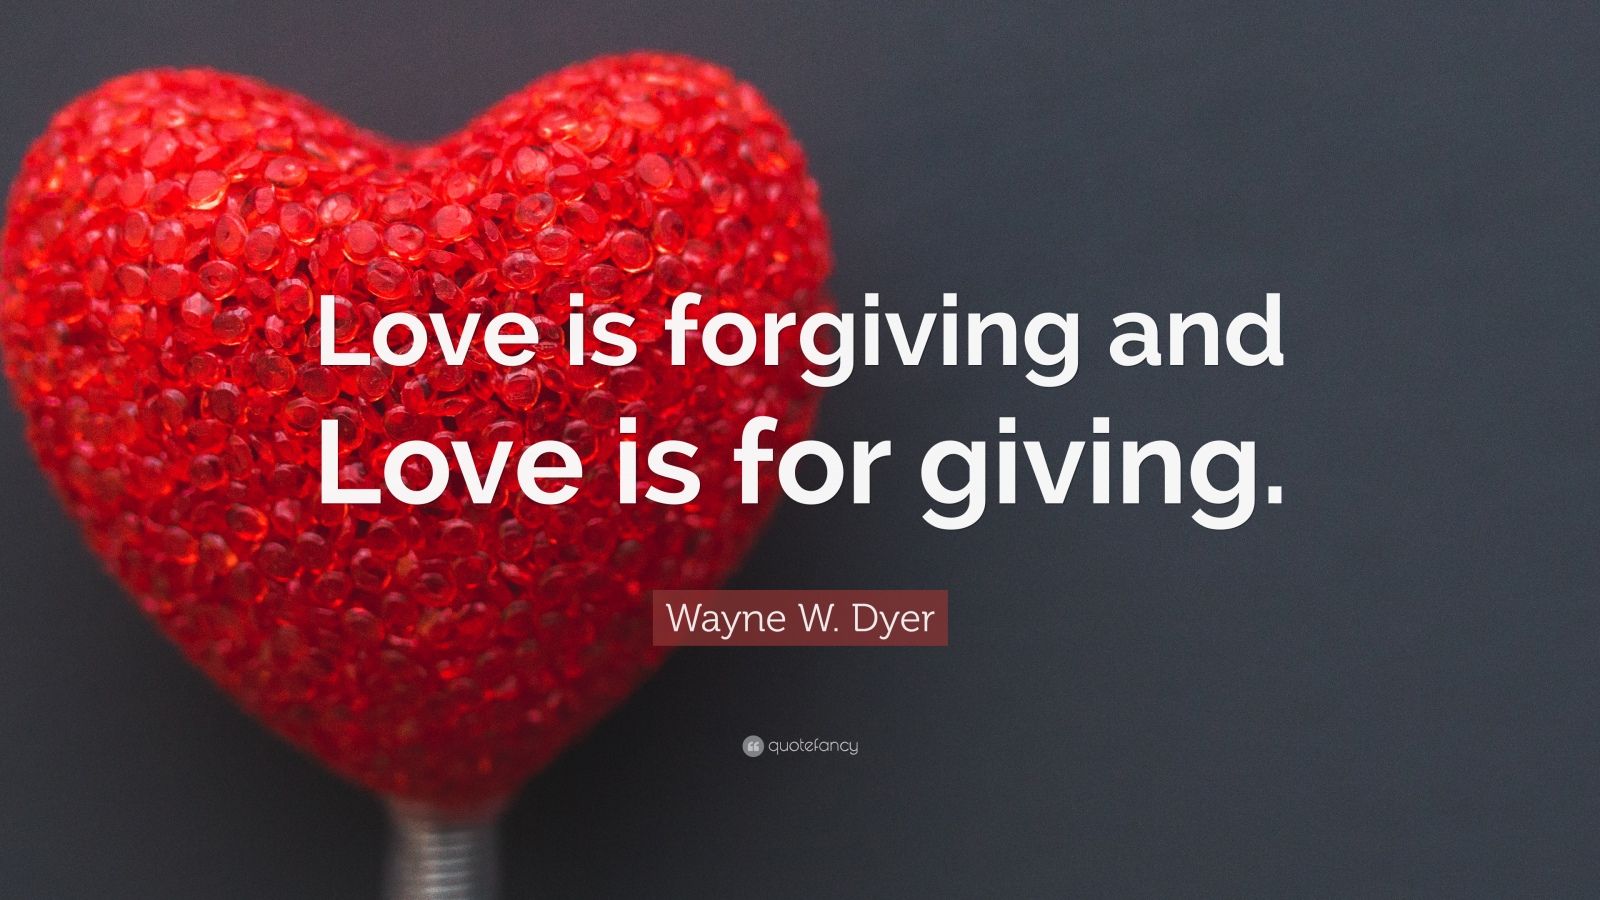 essay on the topic love is giving and forgiving